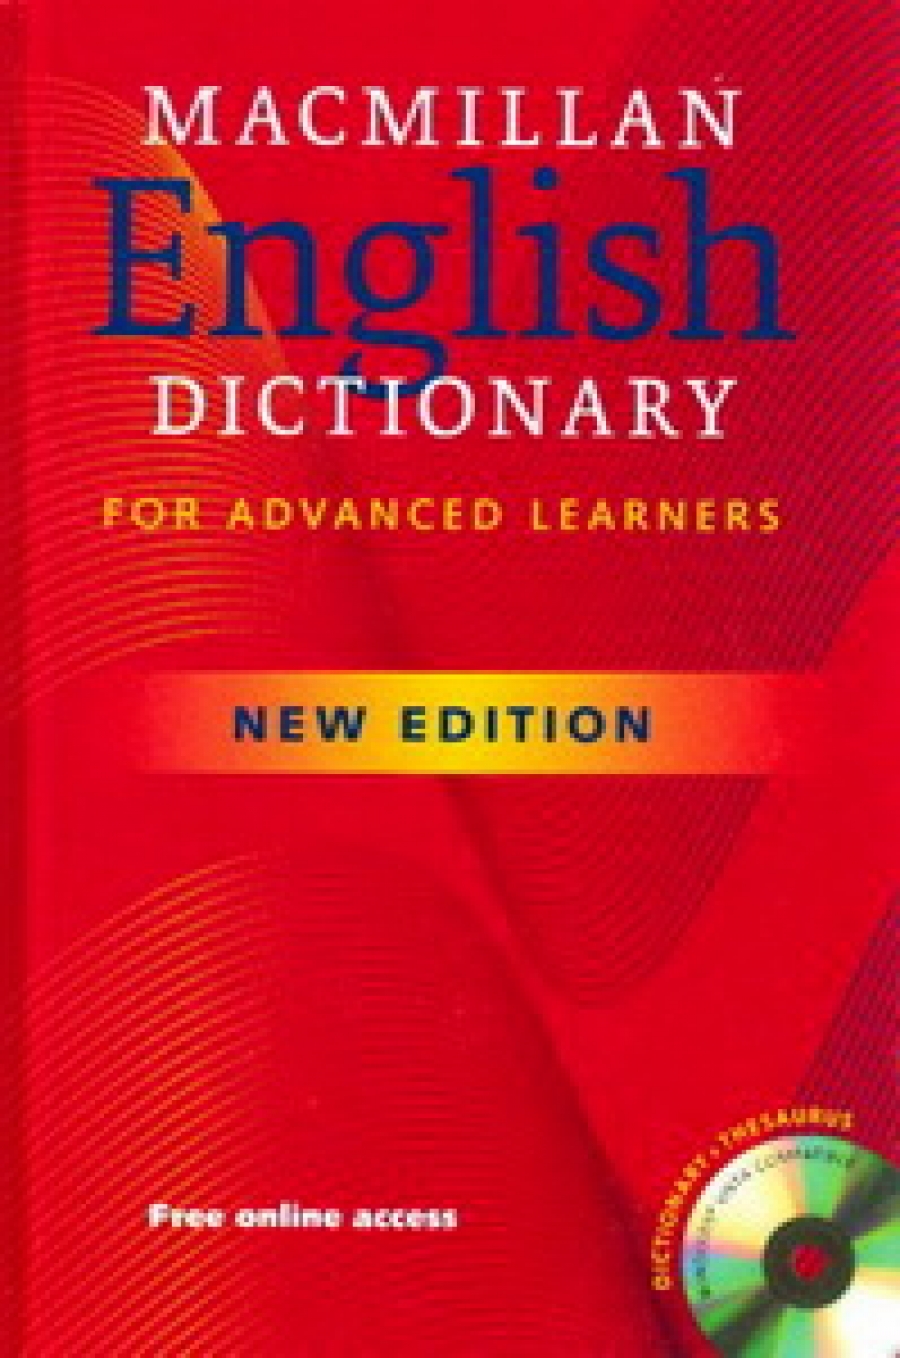 Macmillan Educ. Macmillan English Dictionary for Advanced Learners (New Edition) Hardcover with CD-ROM 